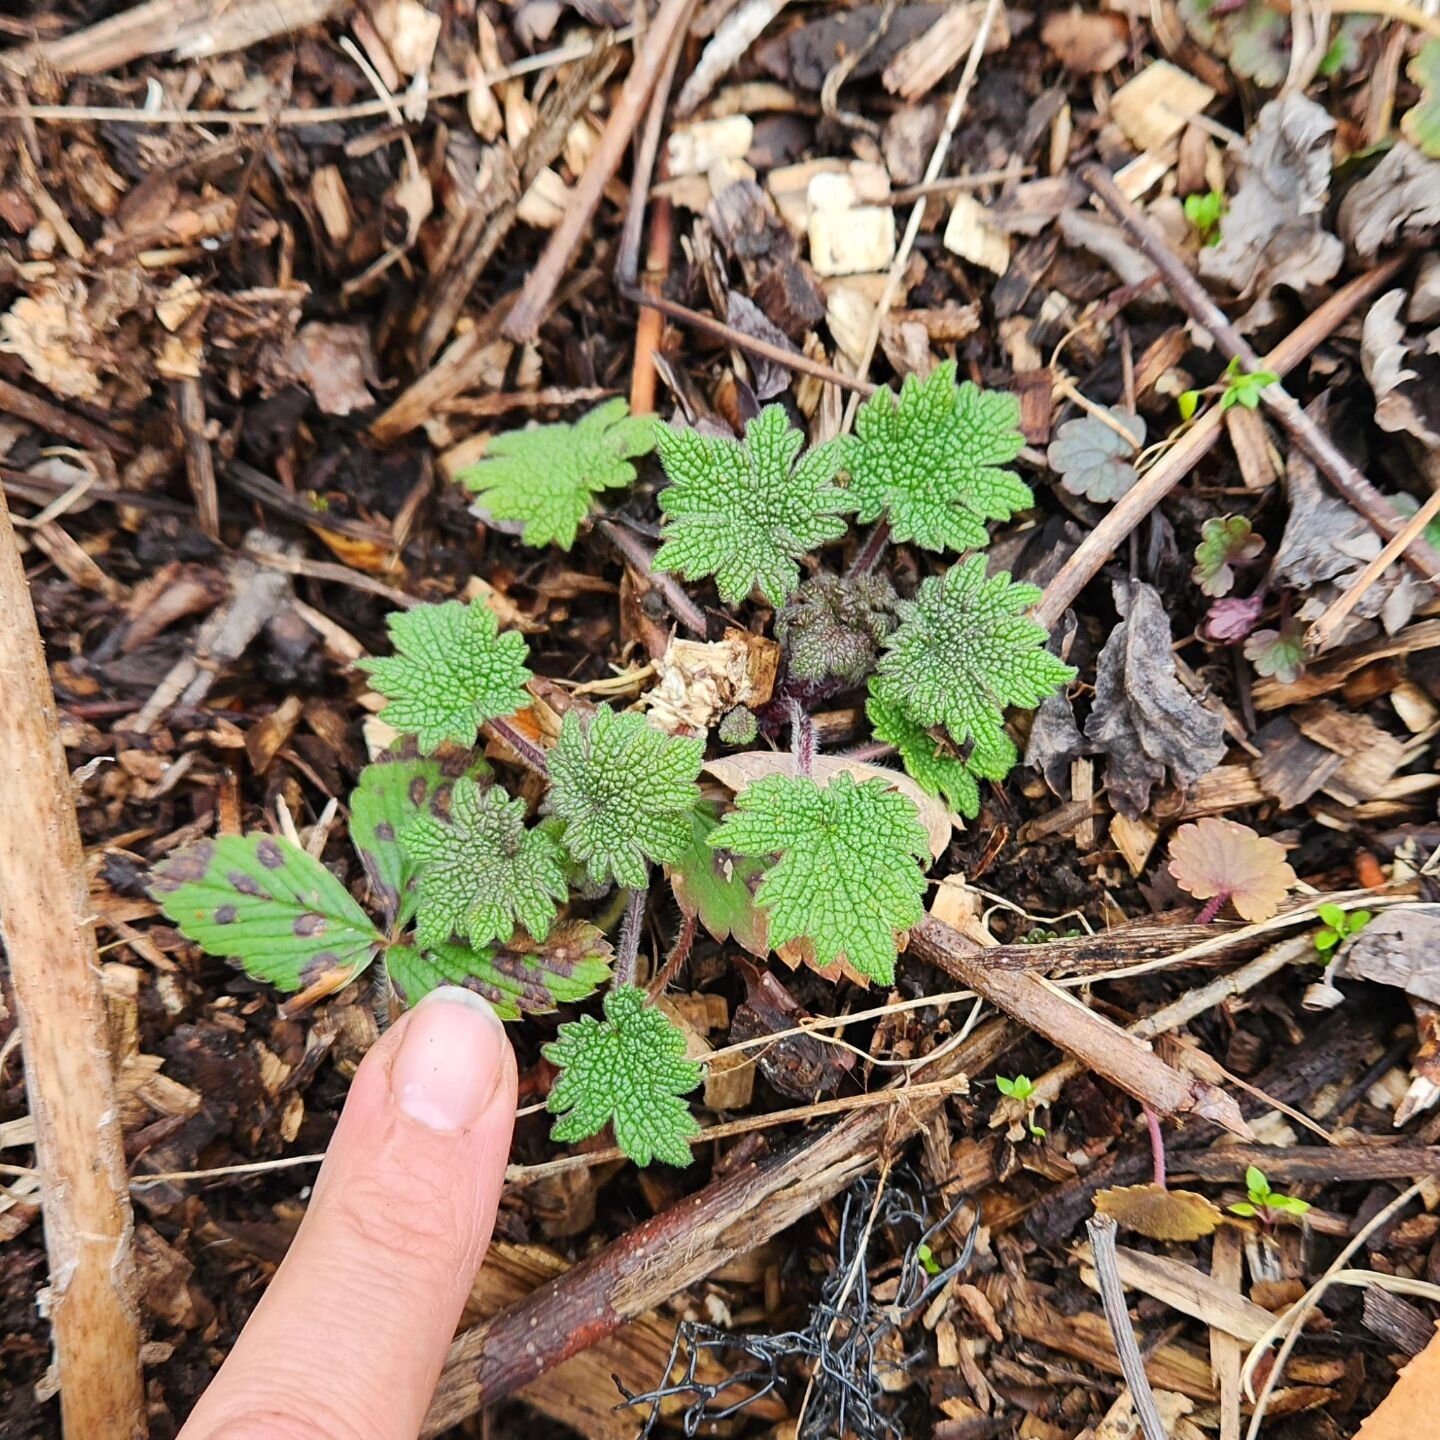 Tiny Motherwort emerges in the garden. If you don't know them in their full glory, you might not know these little plants will become towering giants of the garden, sturdy with  fiercely spiked flowers beloved by pollinators of all kinds.
🌿
 Yesterd